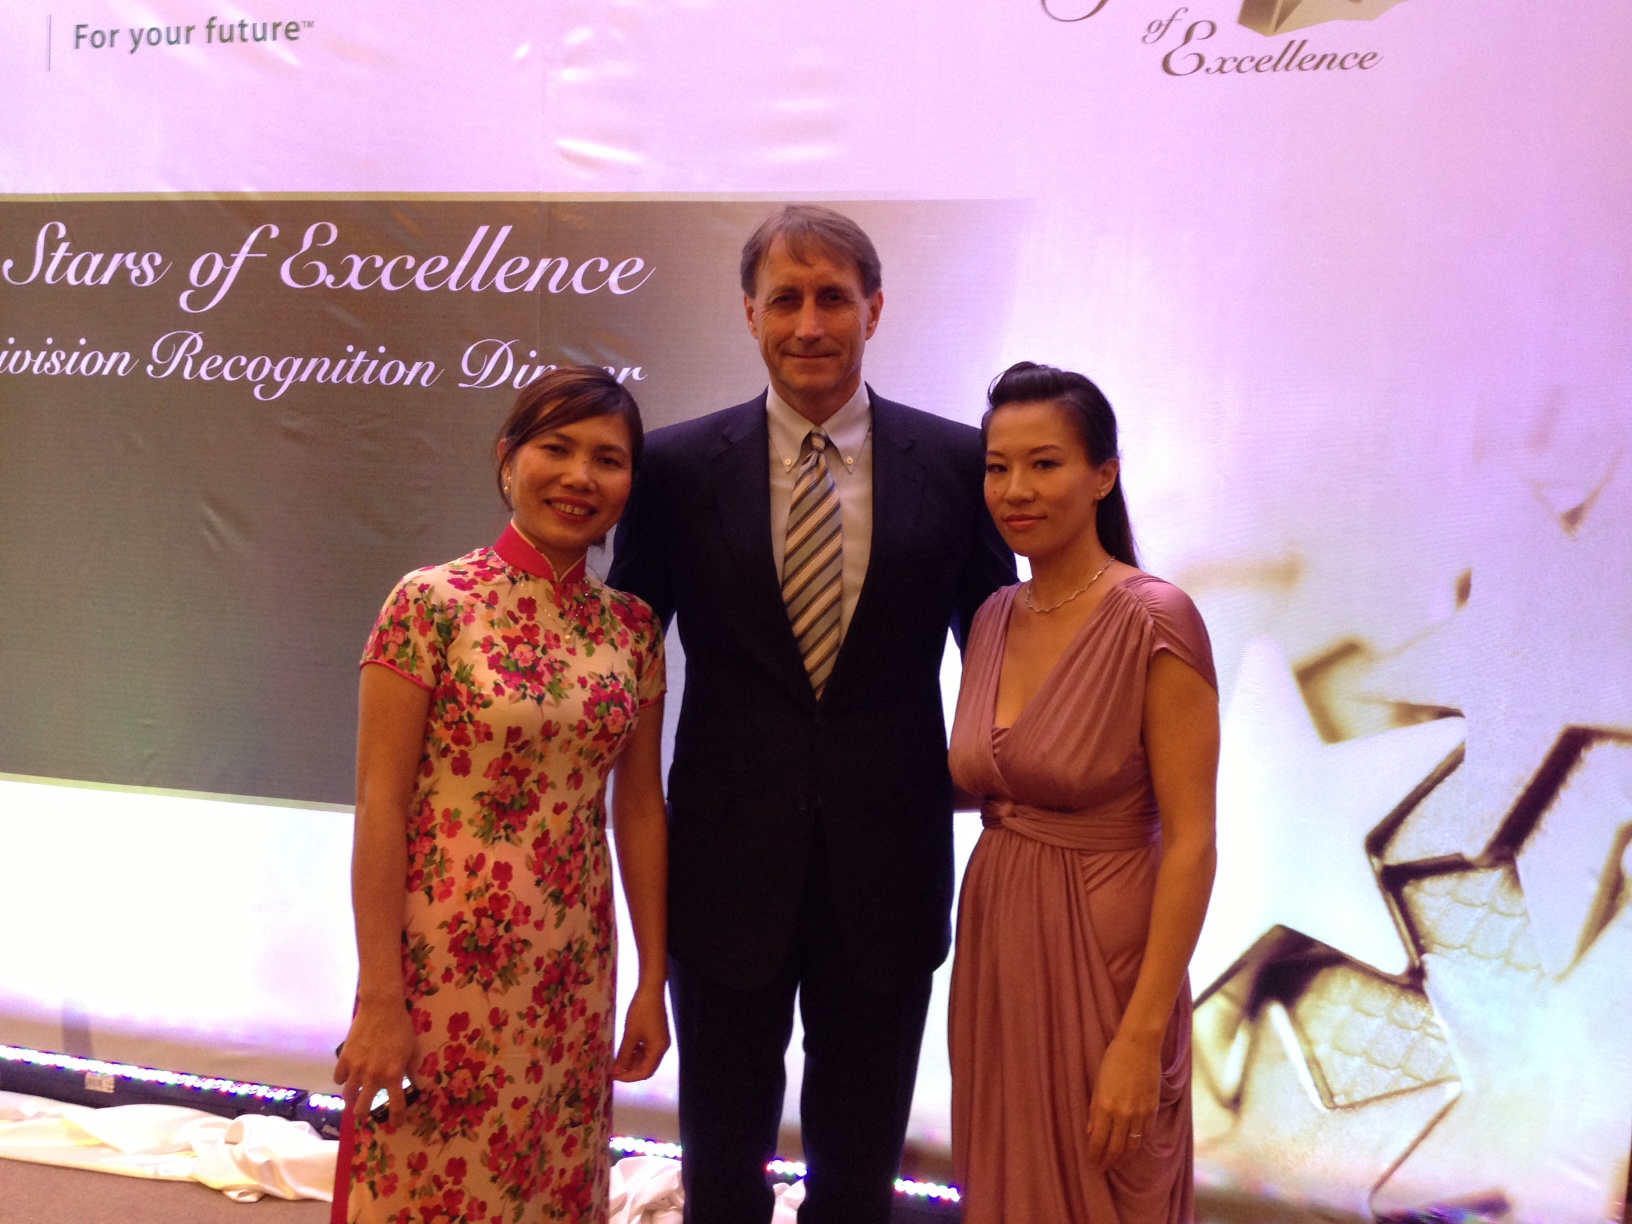 MC for Manulife Financial at Four Seasons Bangkok. Here with some top Asian executives during the award dinner.